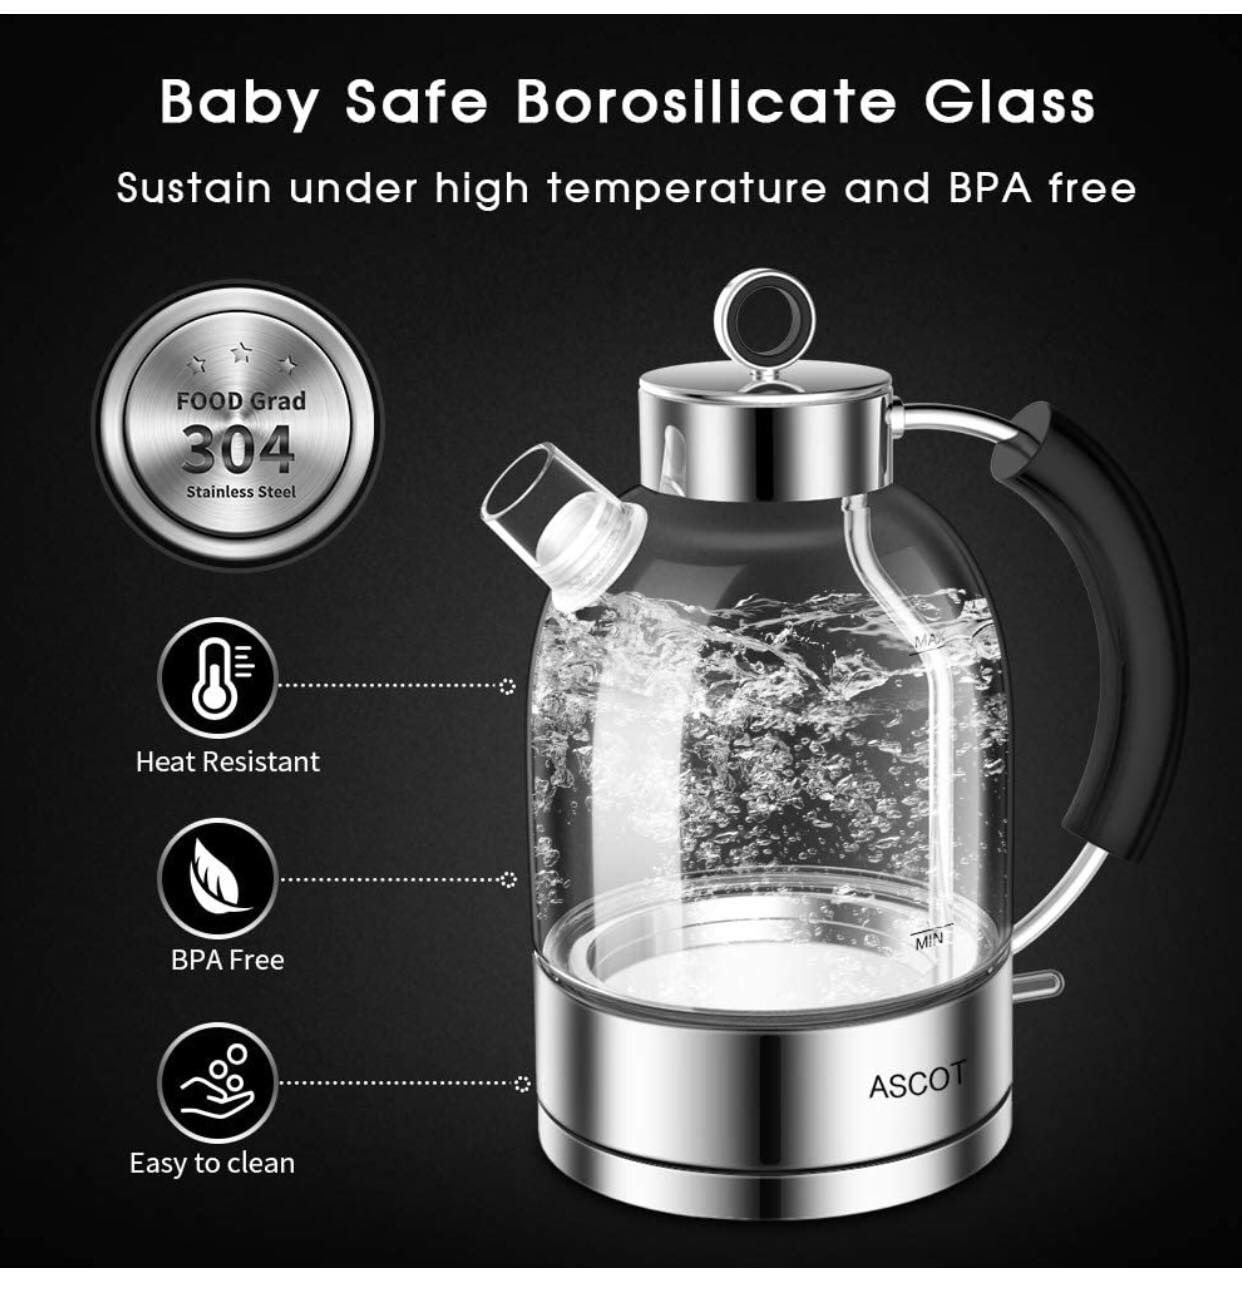 lectric Kettle, Glass Electric Tea Kettle 1.6L, 1500W, Stainless Steel Tea Heater & Hot Water Boiler, Borosilicate Glass, BPA-Free, Cordless, with Au